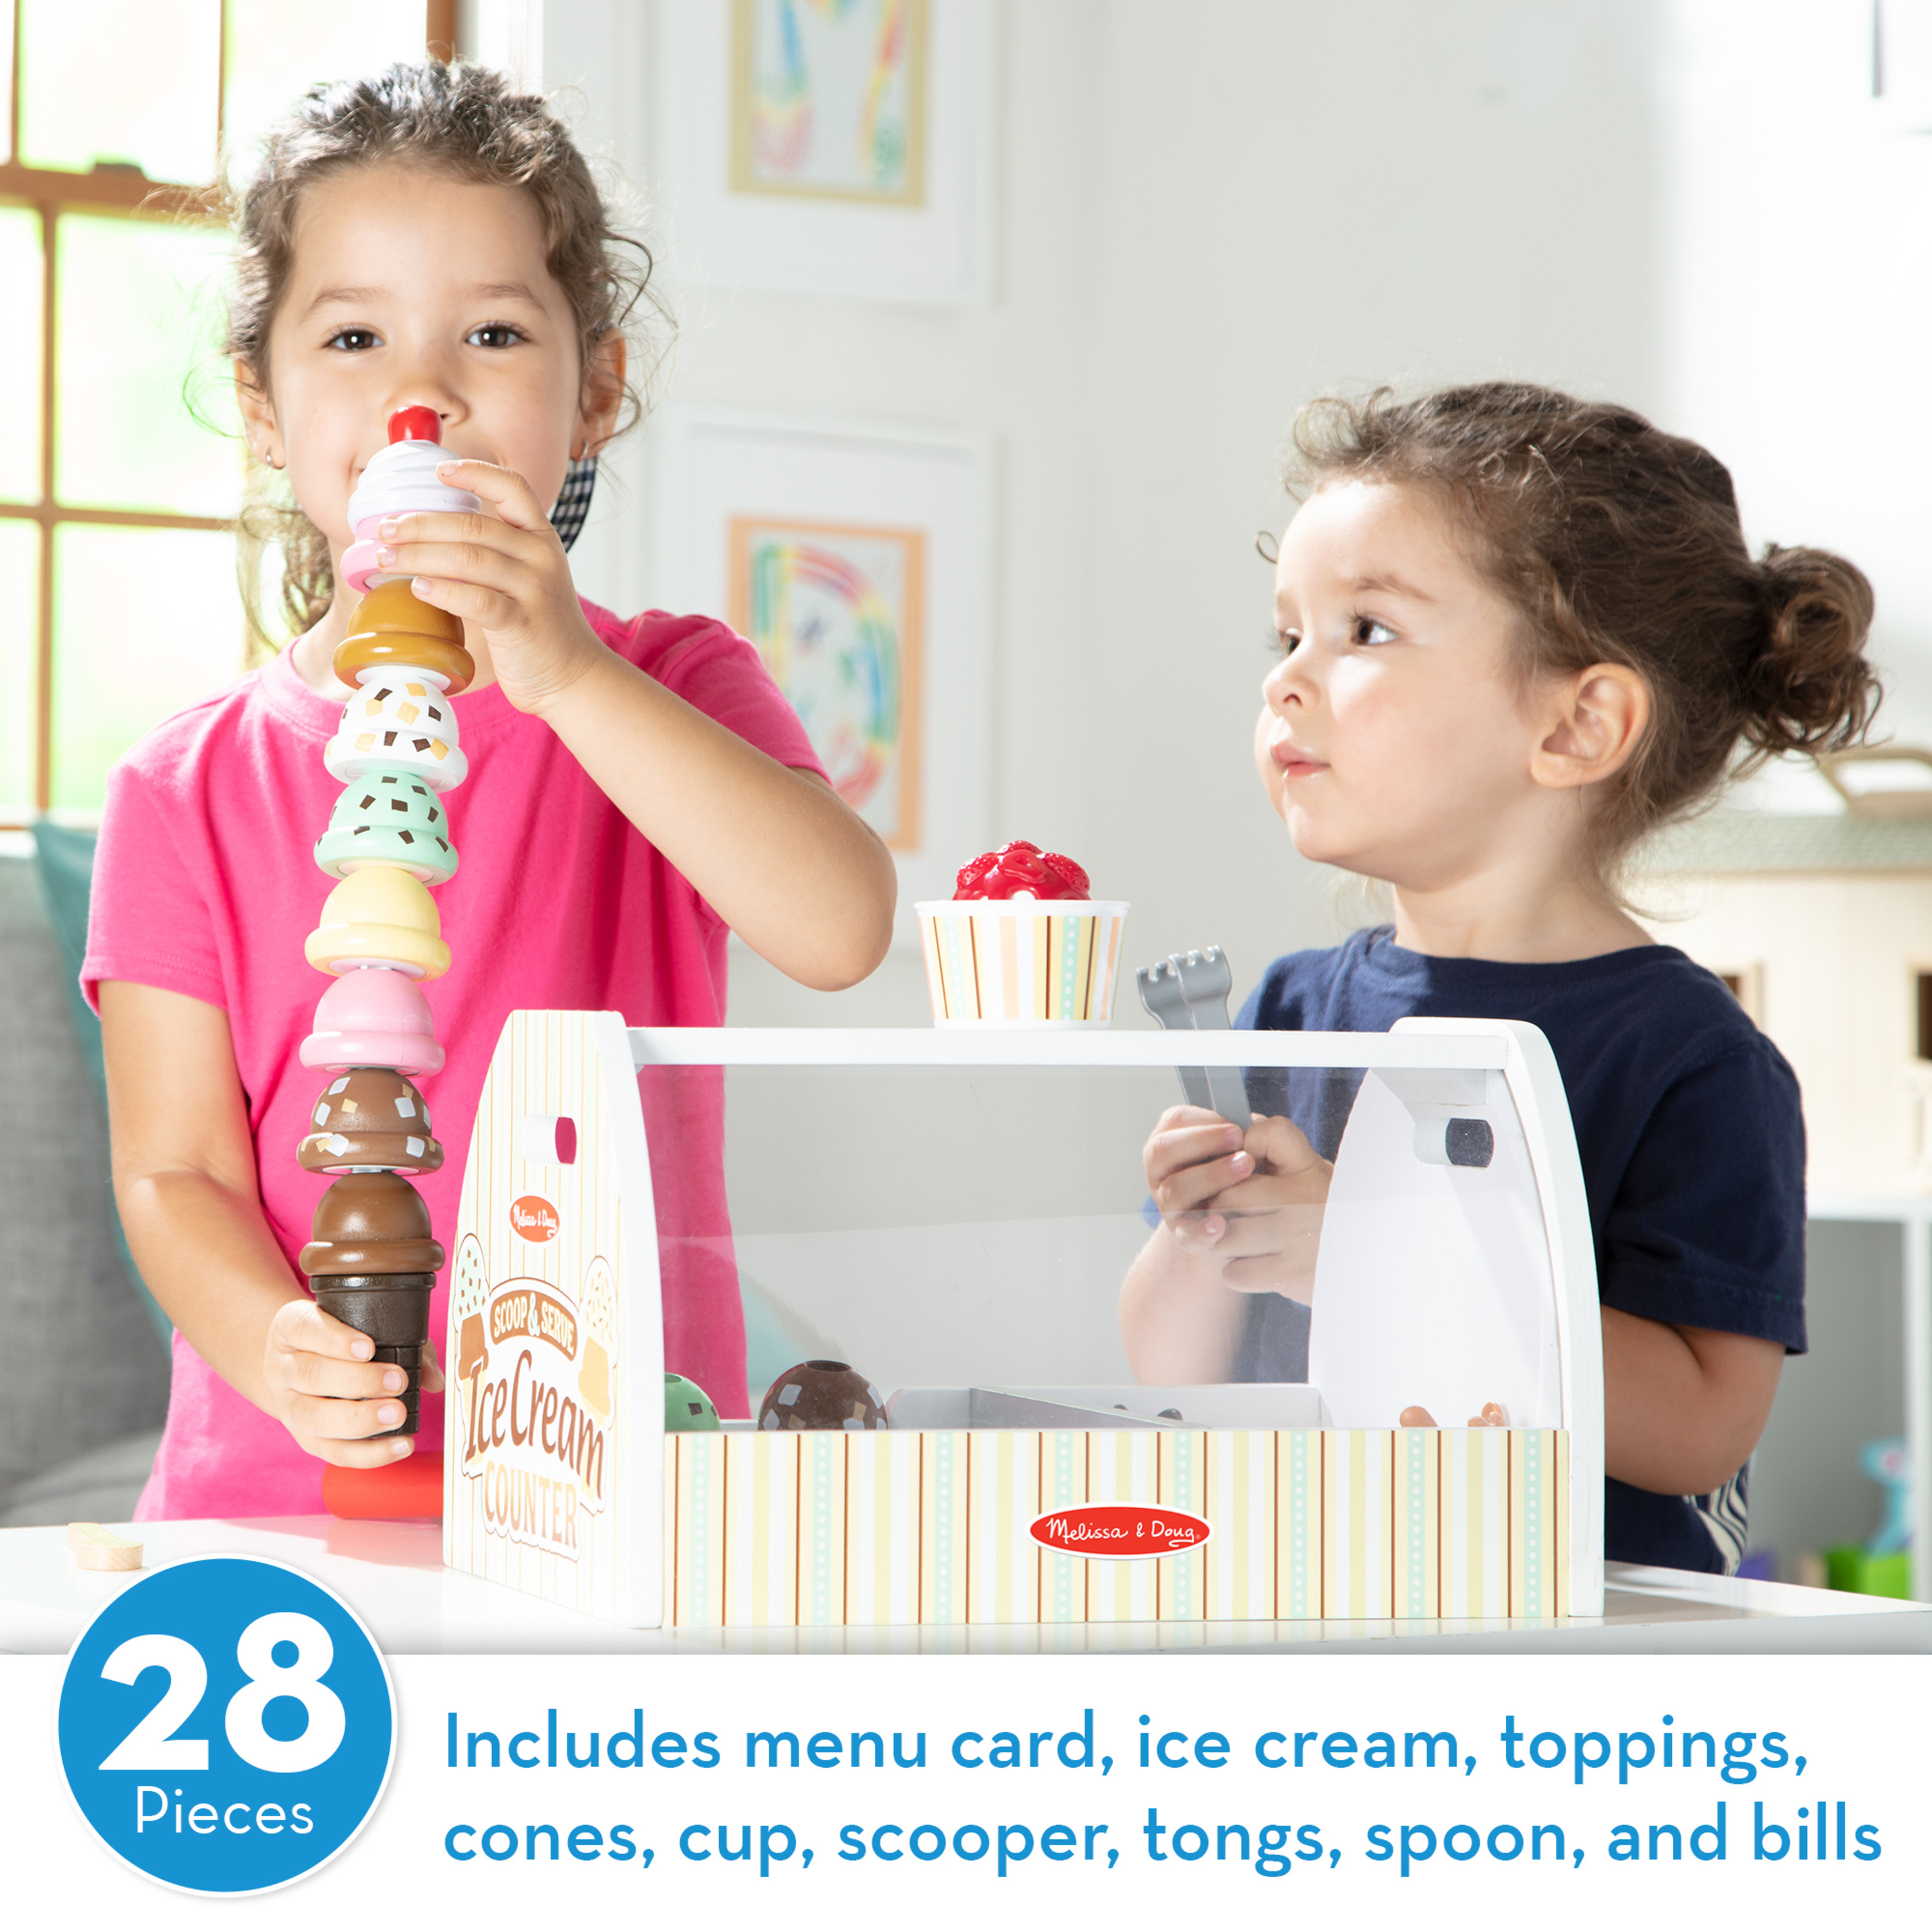 Melissa & Doug Wooden Scoop and Serve Ice Cream Counter (28 pcs) - Play Food and Accessories - image 4 of 11